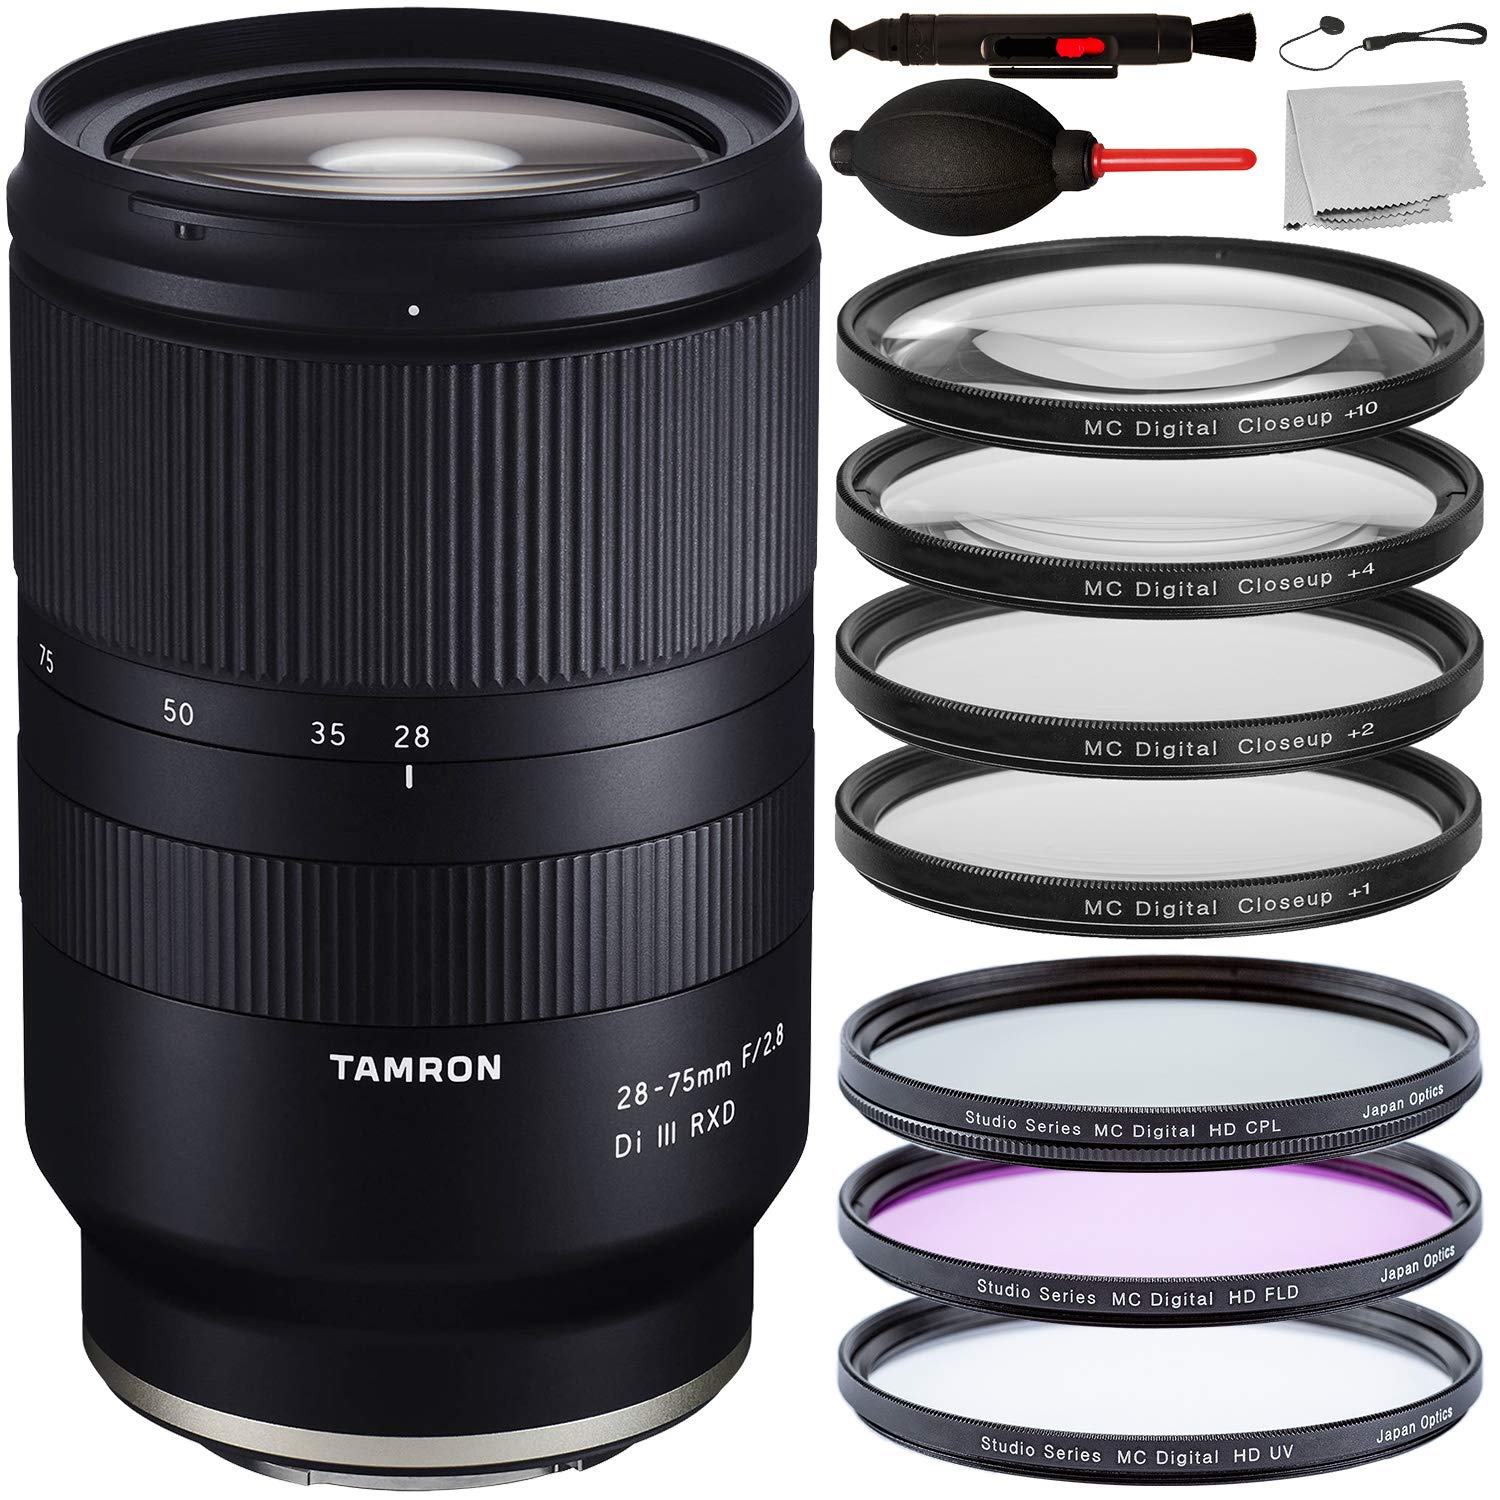 Tamron 28-75mm f/2.8 Di III RXD Lens for Sony E -A036 with Essential Accessory Bundle